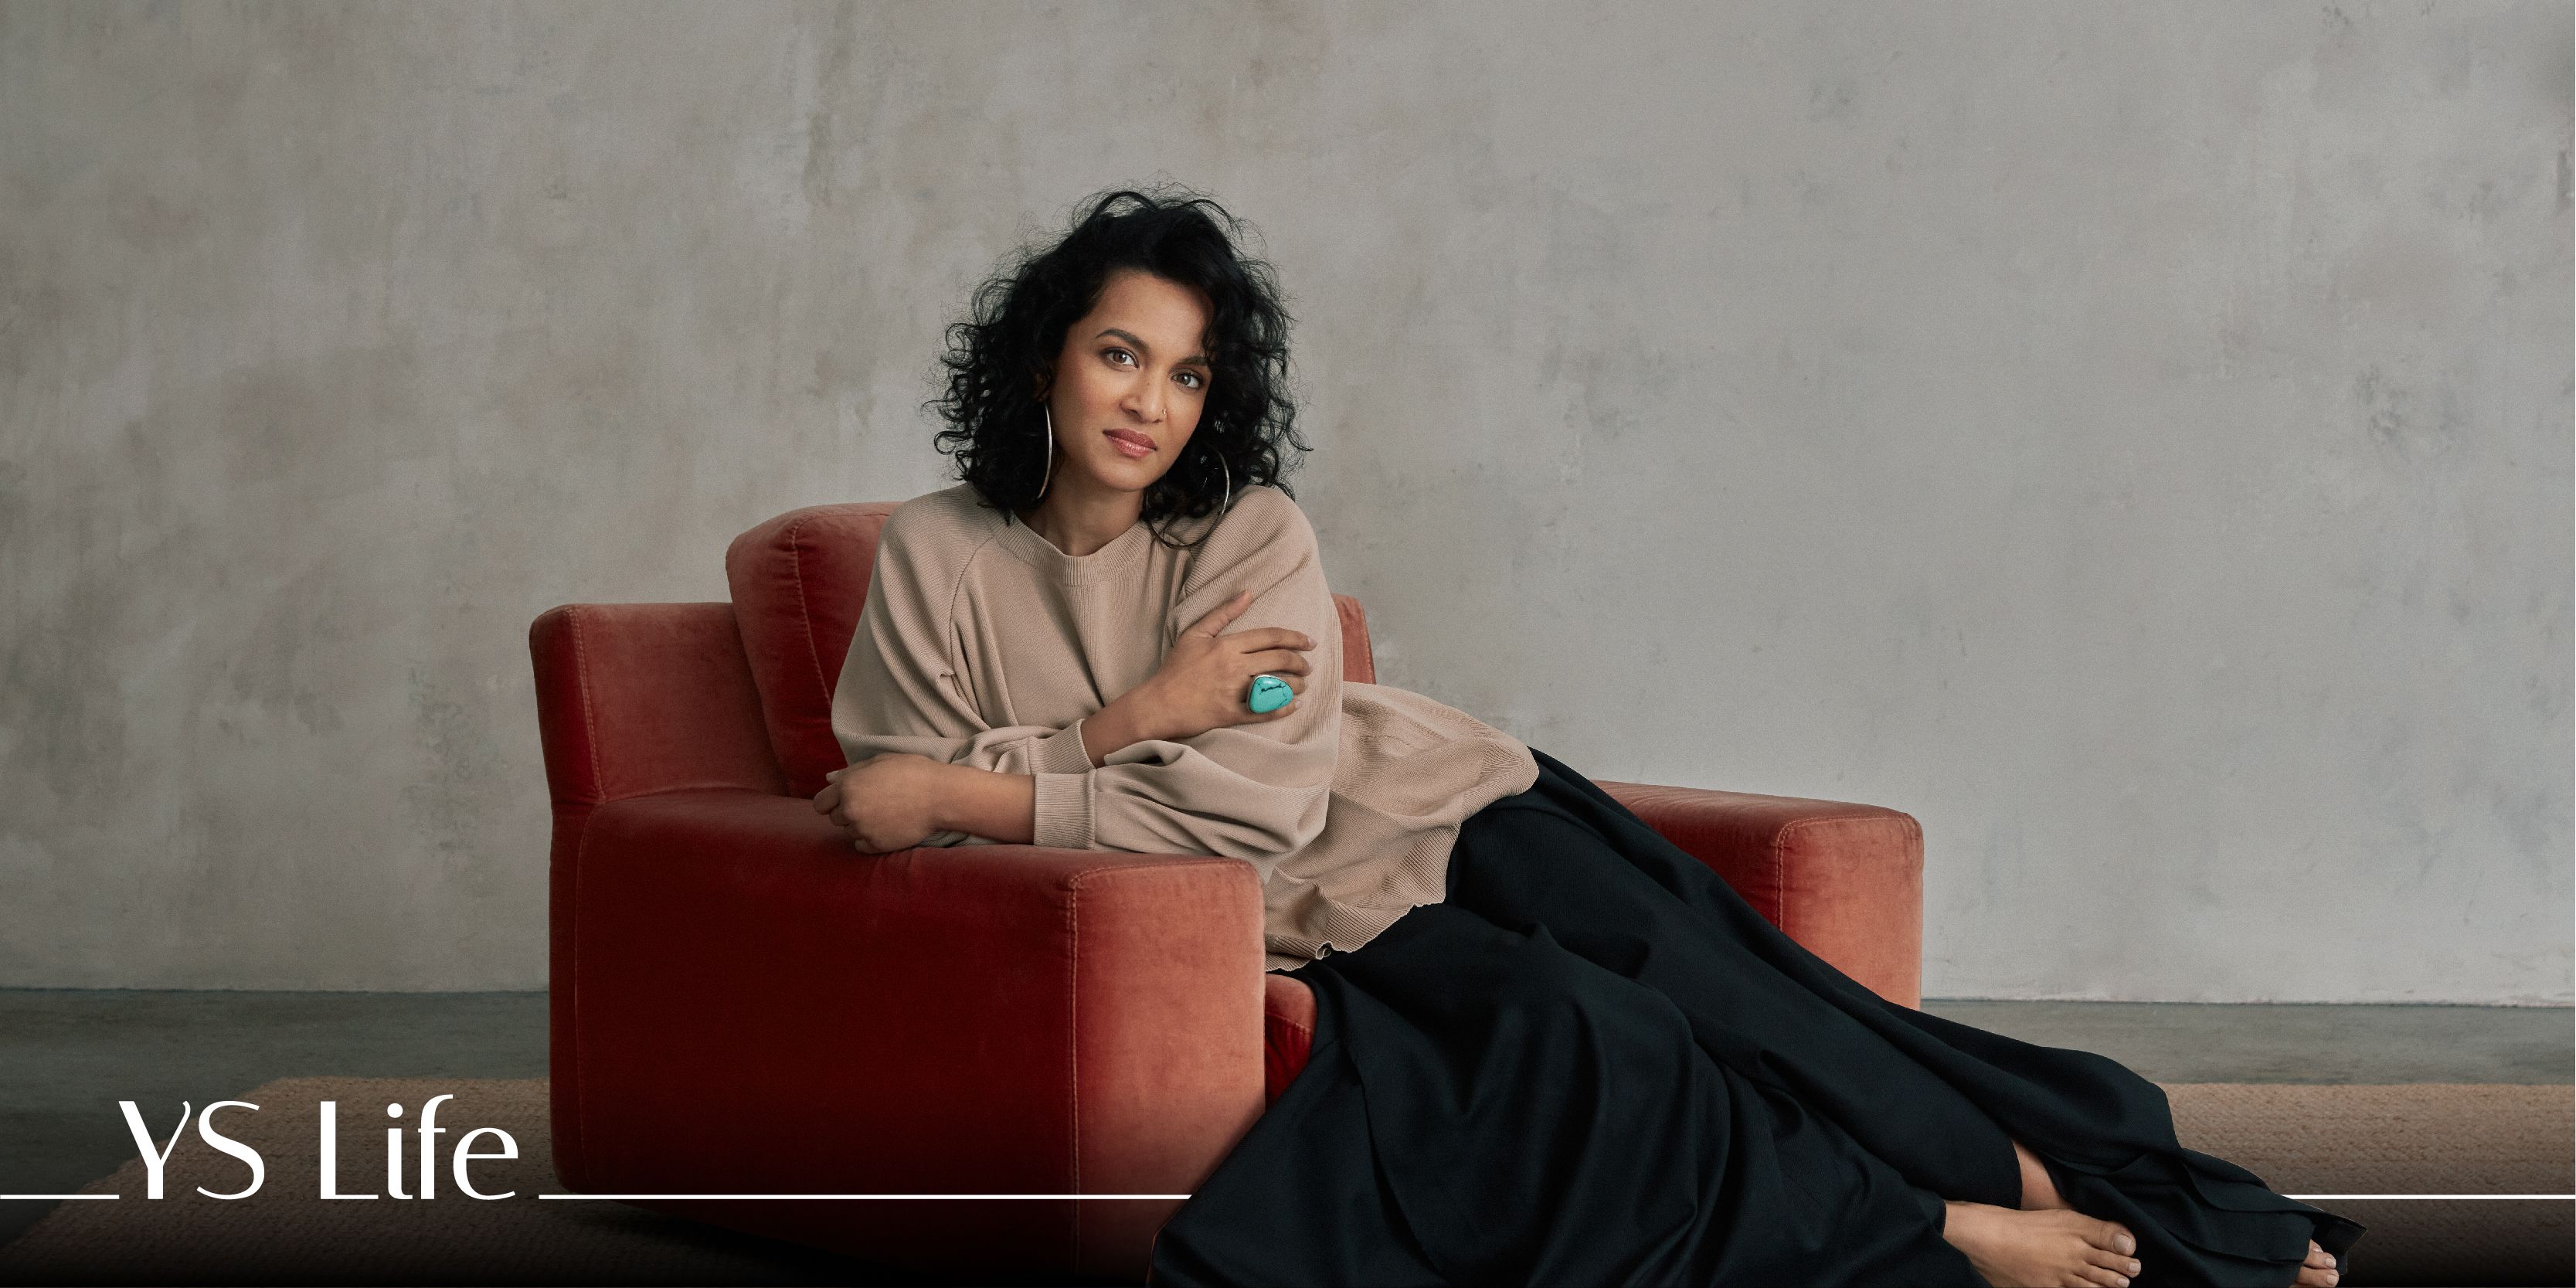 Anoushka Shankar on her latest mini album, the power of collaboration, and forging her own path